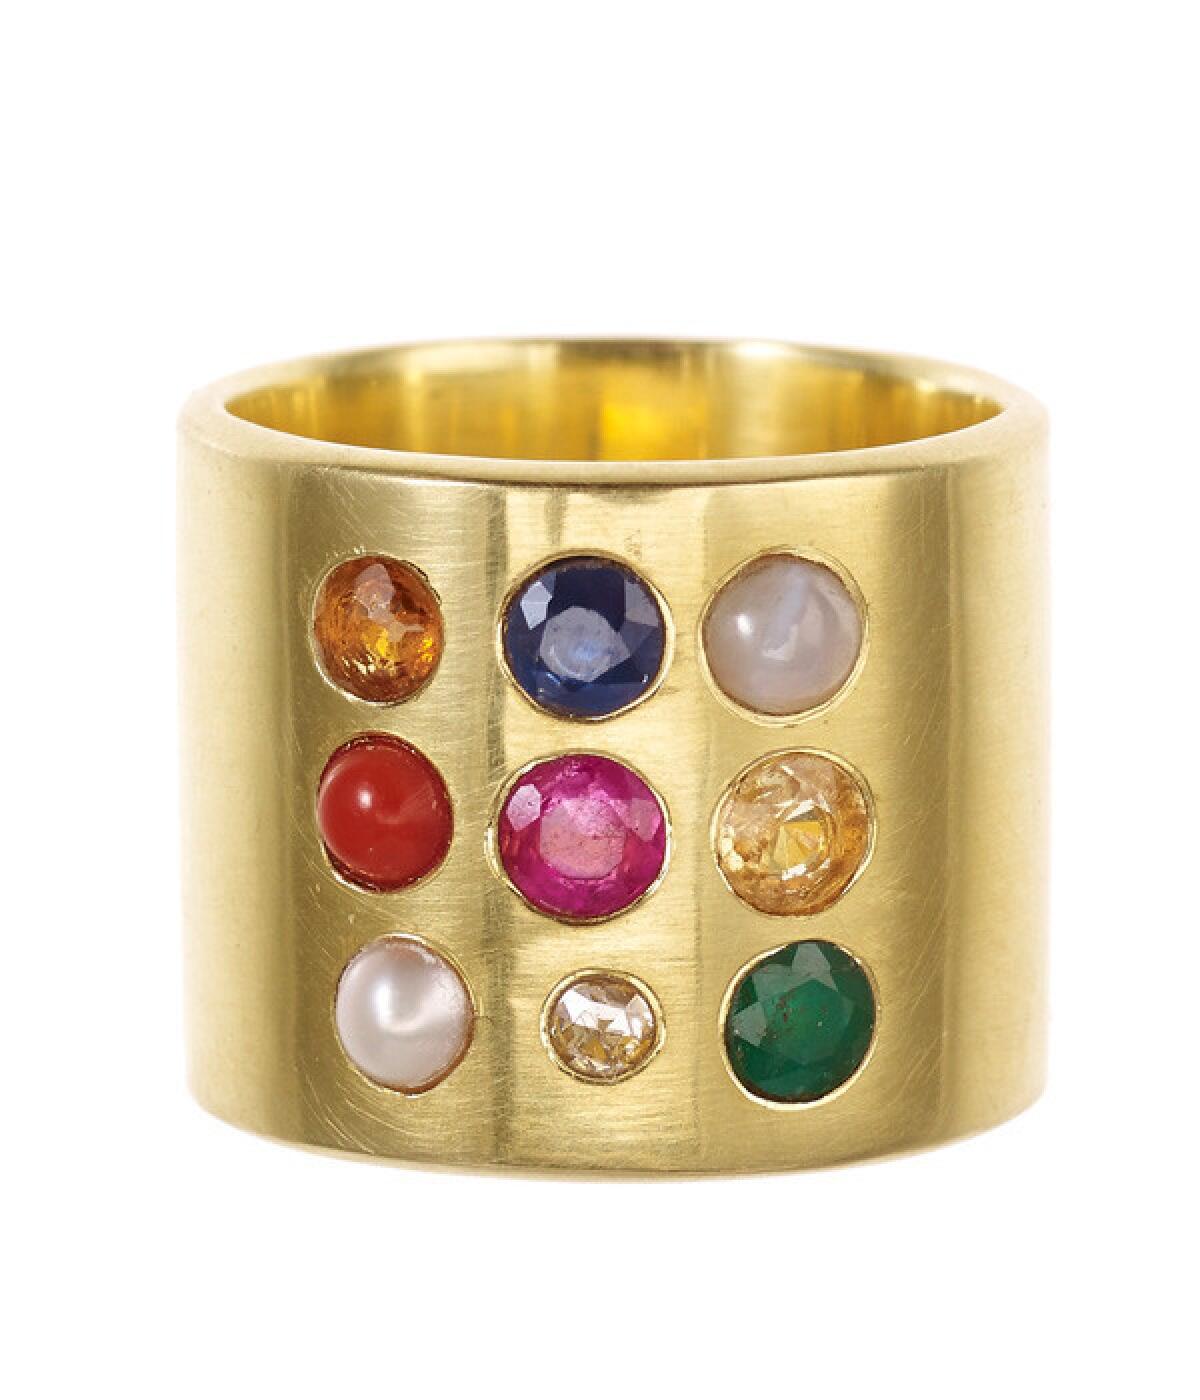 Pippa Small "Navrtana" ring in 18-karat gold with gems representing the nine planets: ruby, diamond, pearl, coral, yellow sapphire, emerald, hessonite, blue sapphire and cat's eye.